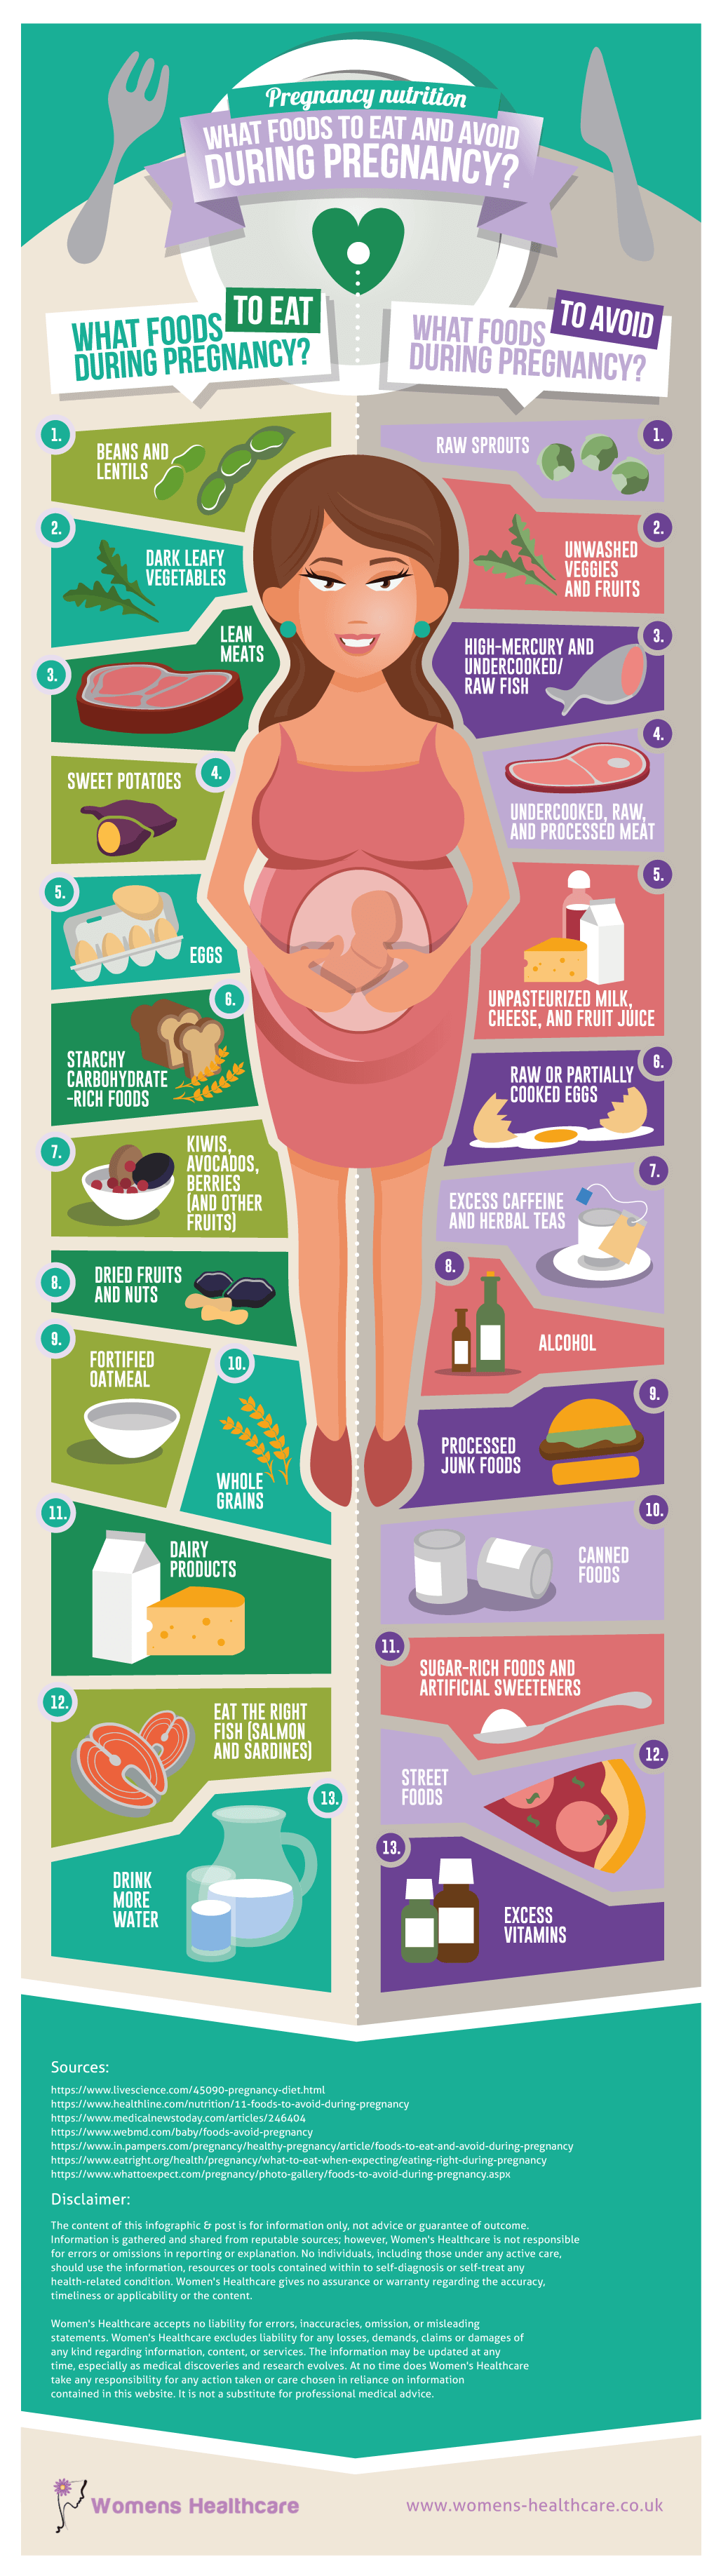 Pregnancy Nutrition: A List of Foods to Eat and Avoid (Infographic